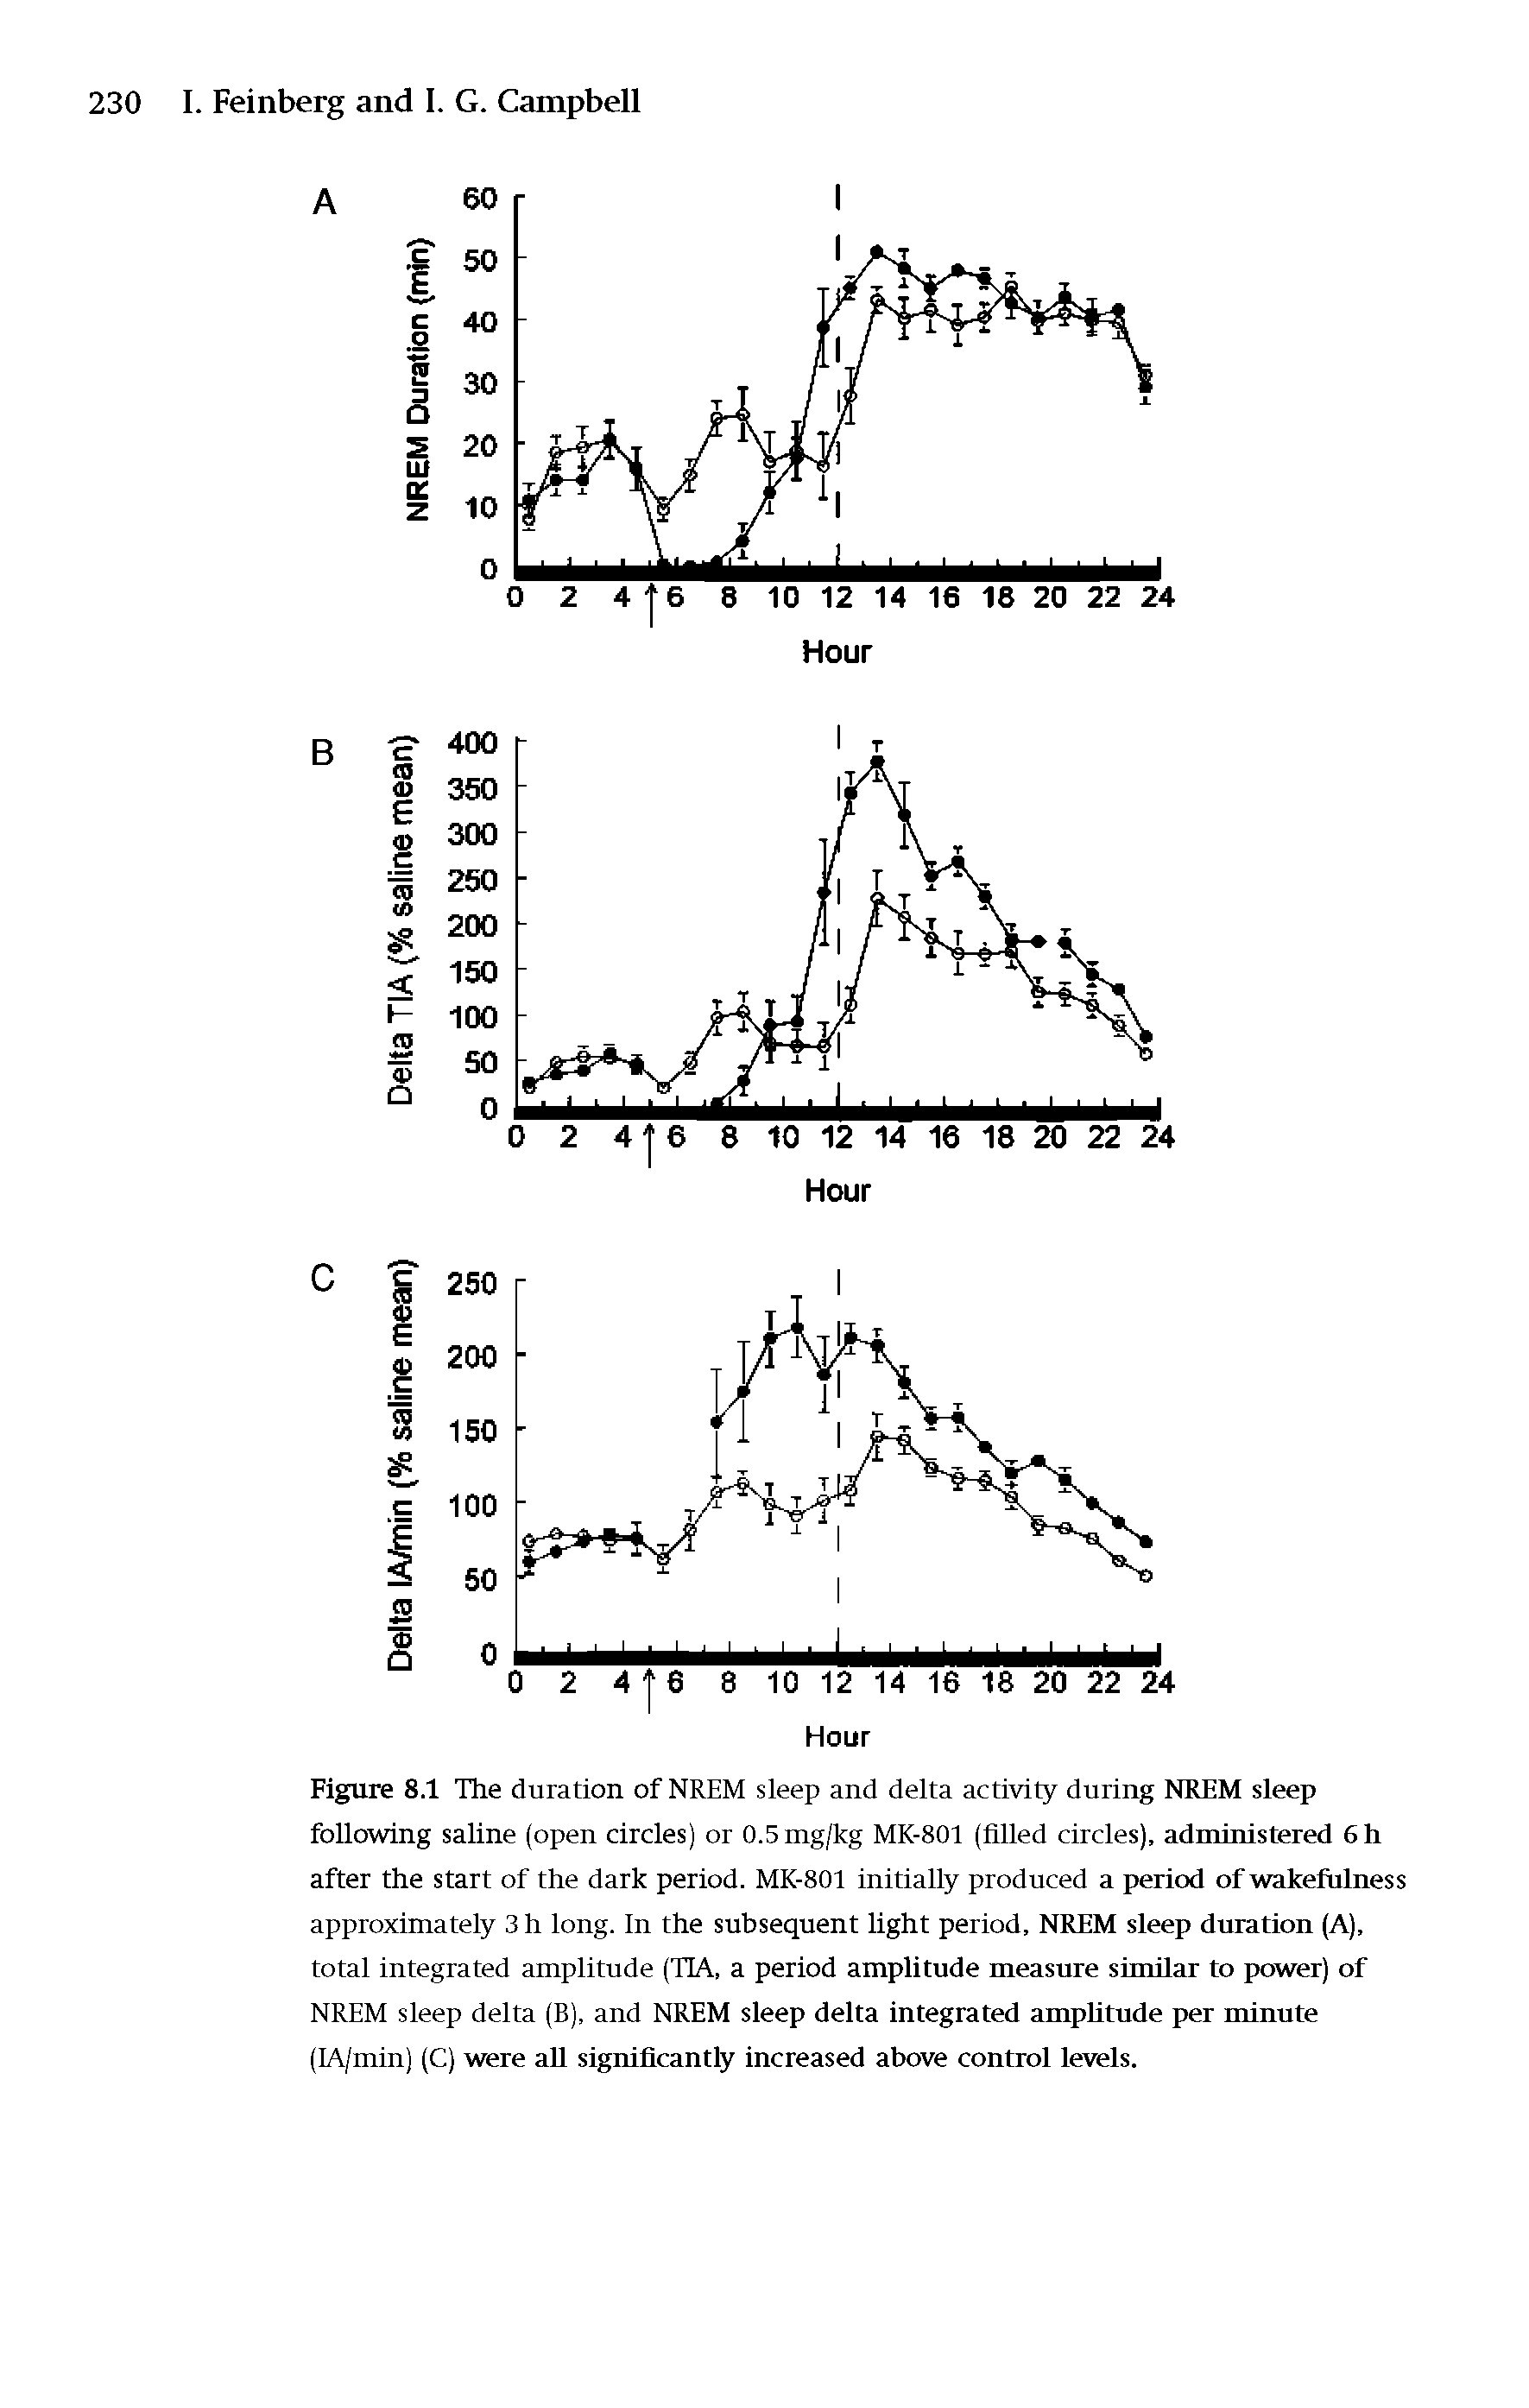 Figure 8.1 The duration of NREM sleep and delta activity during NREM sleep following saline (open circles) or 0.5mg/kg MK-801 (filled circles), administered 6h after the start of the dark period. MK-801 initially produced a period of wakefulness approximately 3 h long. In the subsequent light period, NREM sleep duration (A), total integrated amplitude (TIA, a period amplitude measure similar to power) of NREM sleep delta (B), and NREM sleep delta integrated amplitude per minute (IA/min) (C) were all significantly increased above control levels.